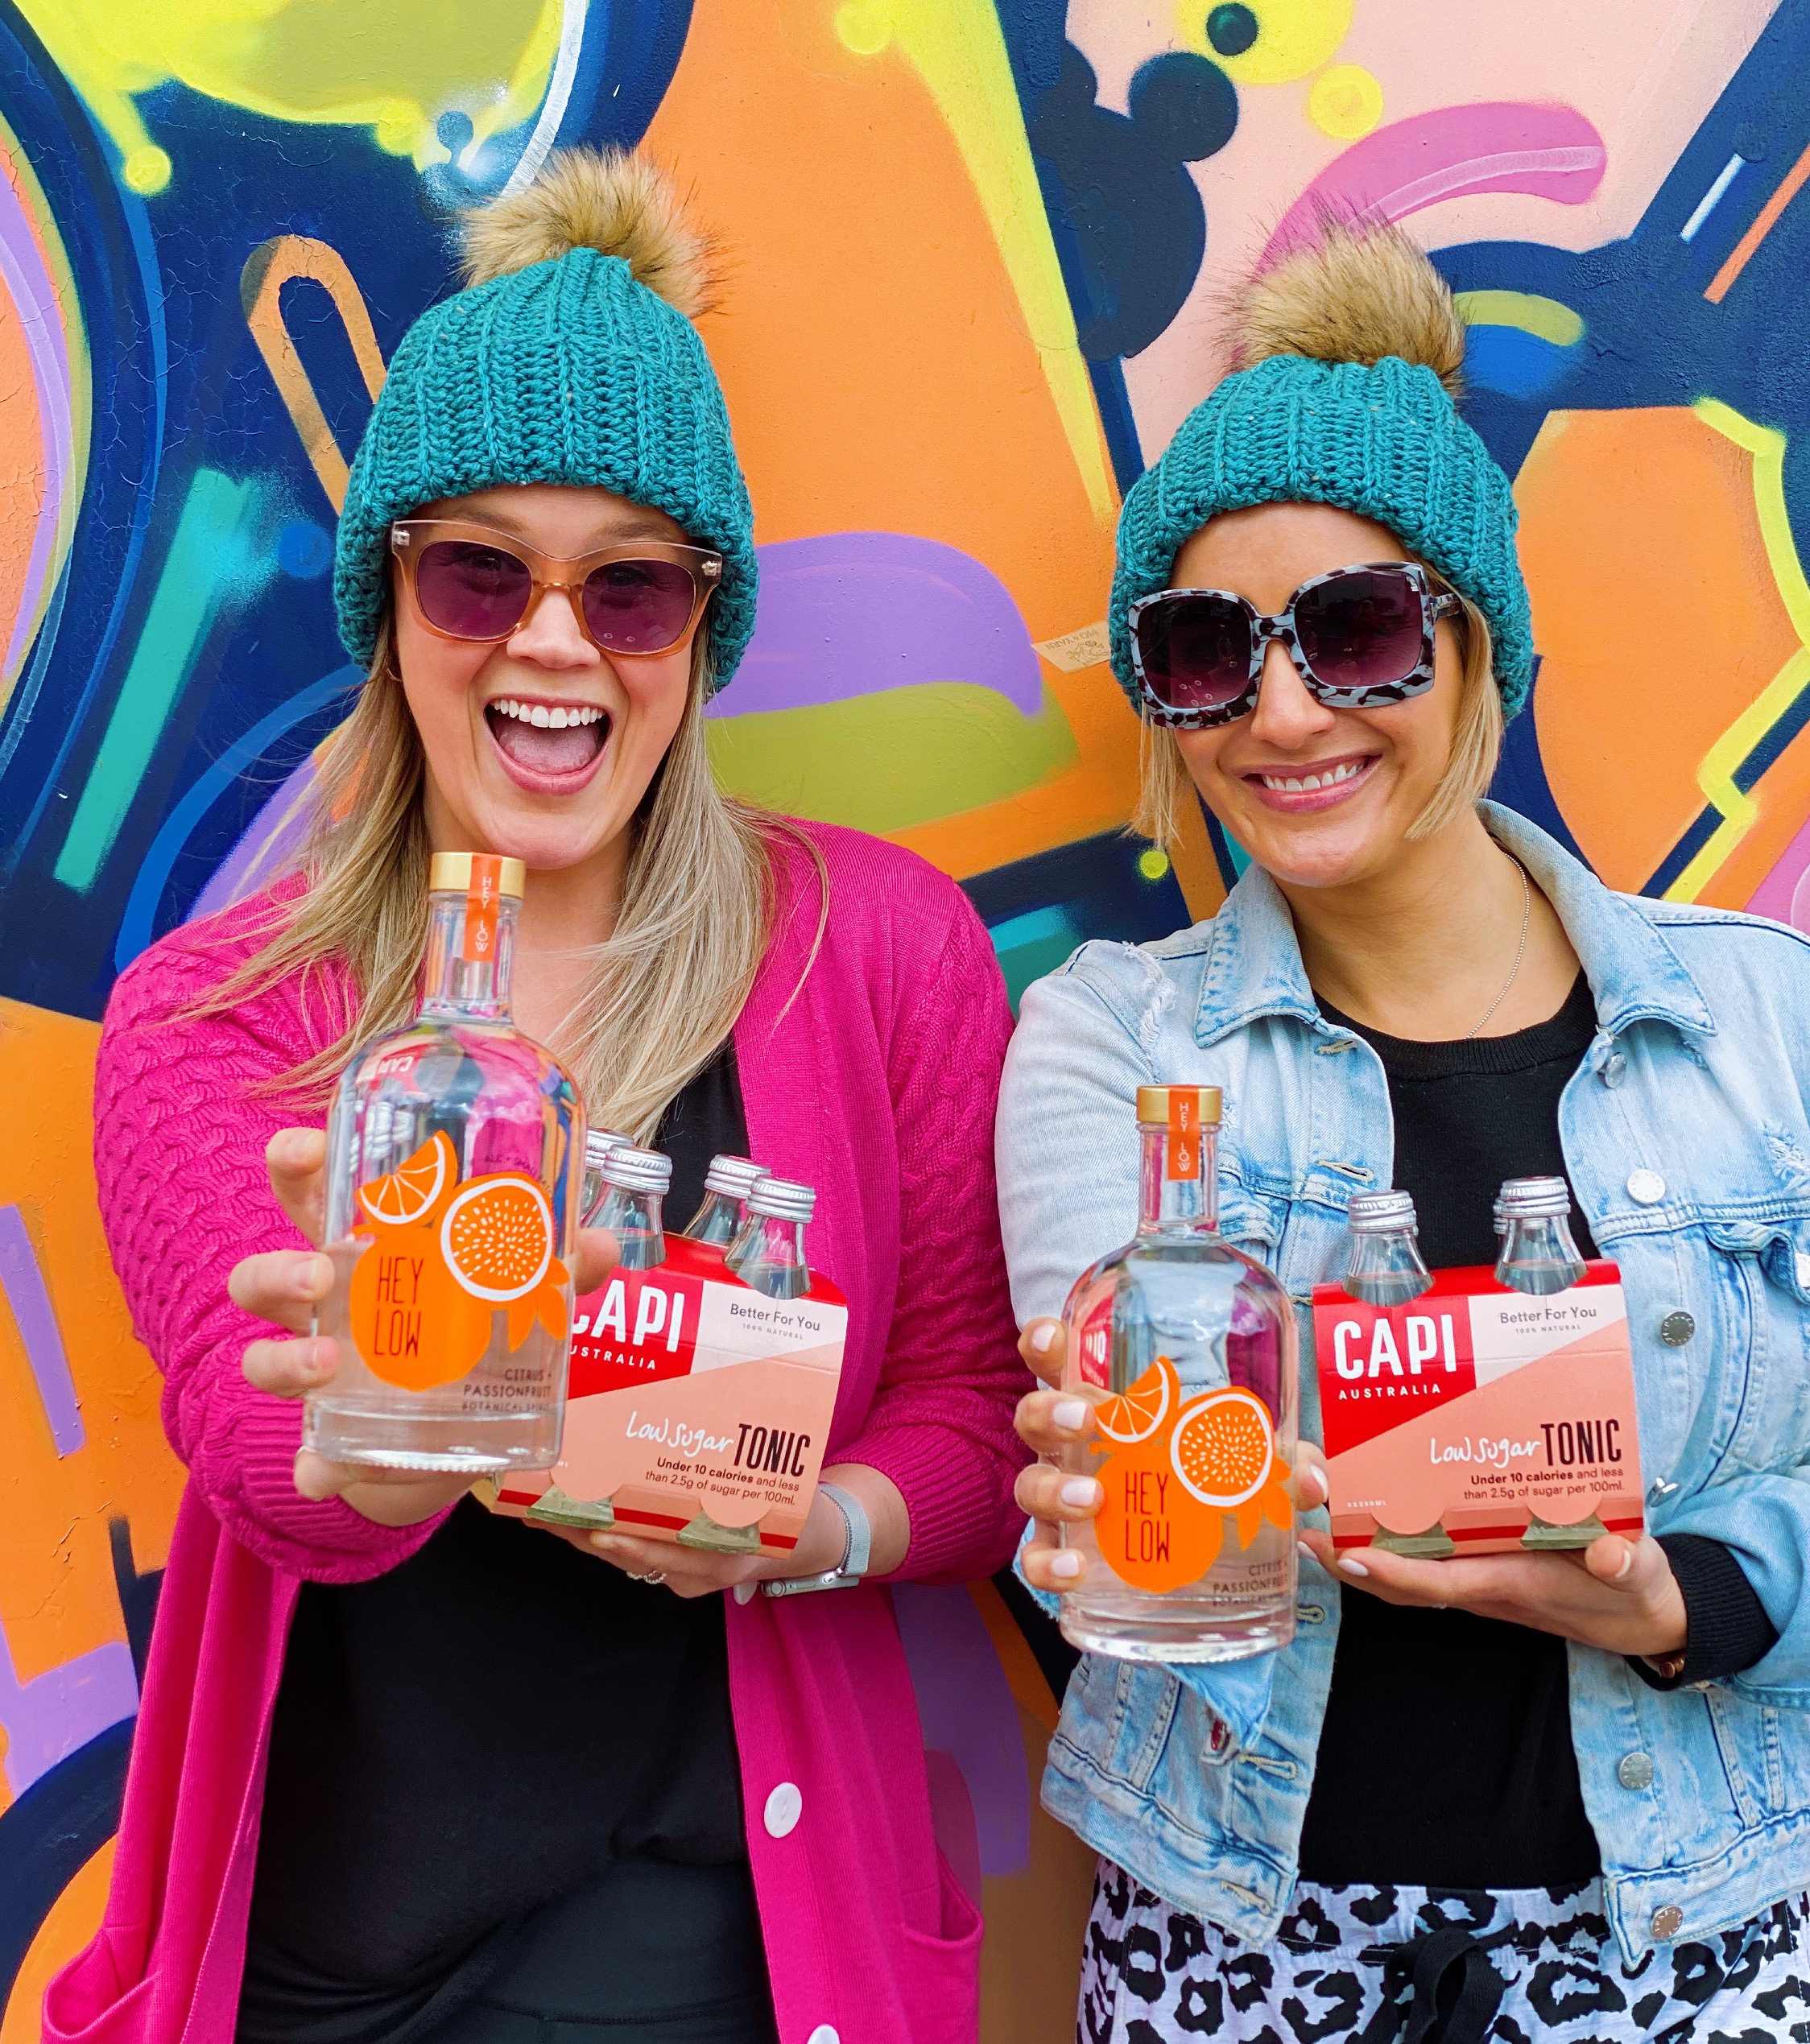 WIN an epic winter pack for you and your gin-loving bestie thanks to Hey Low Spirits!